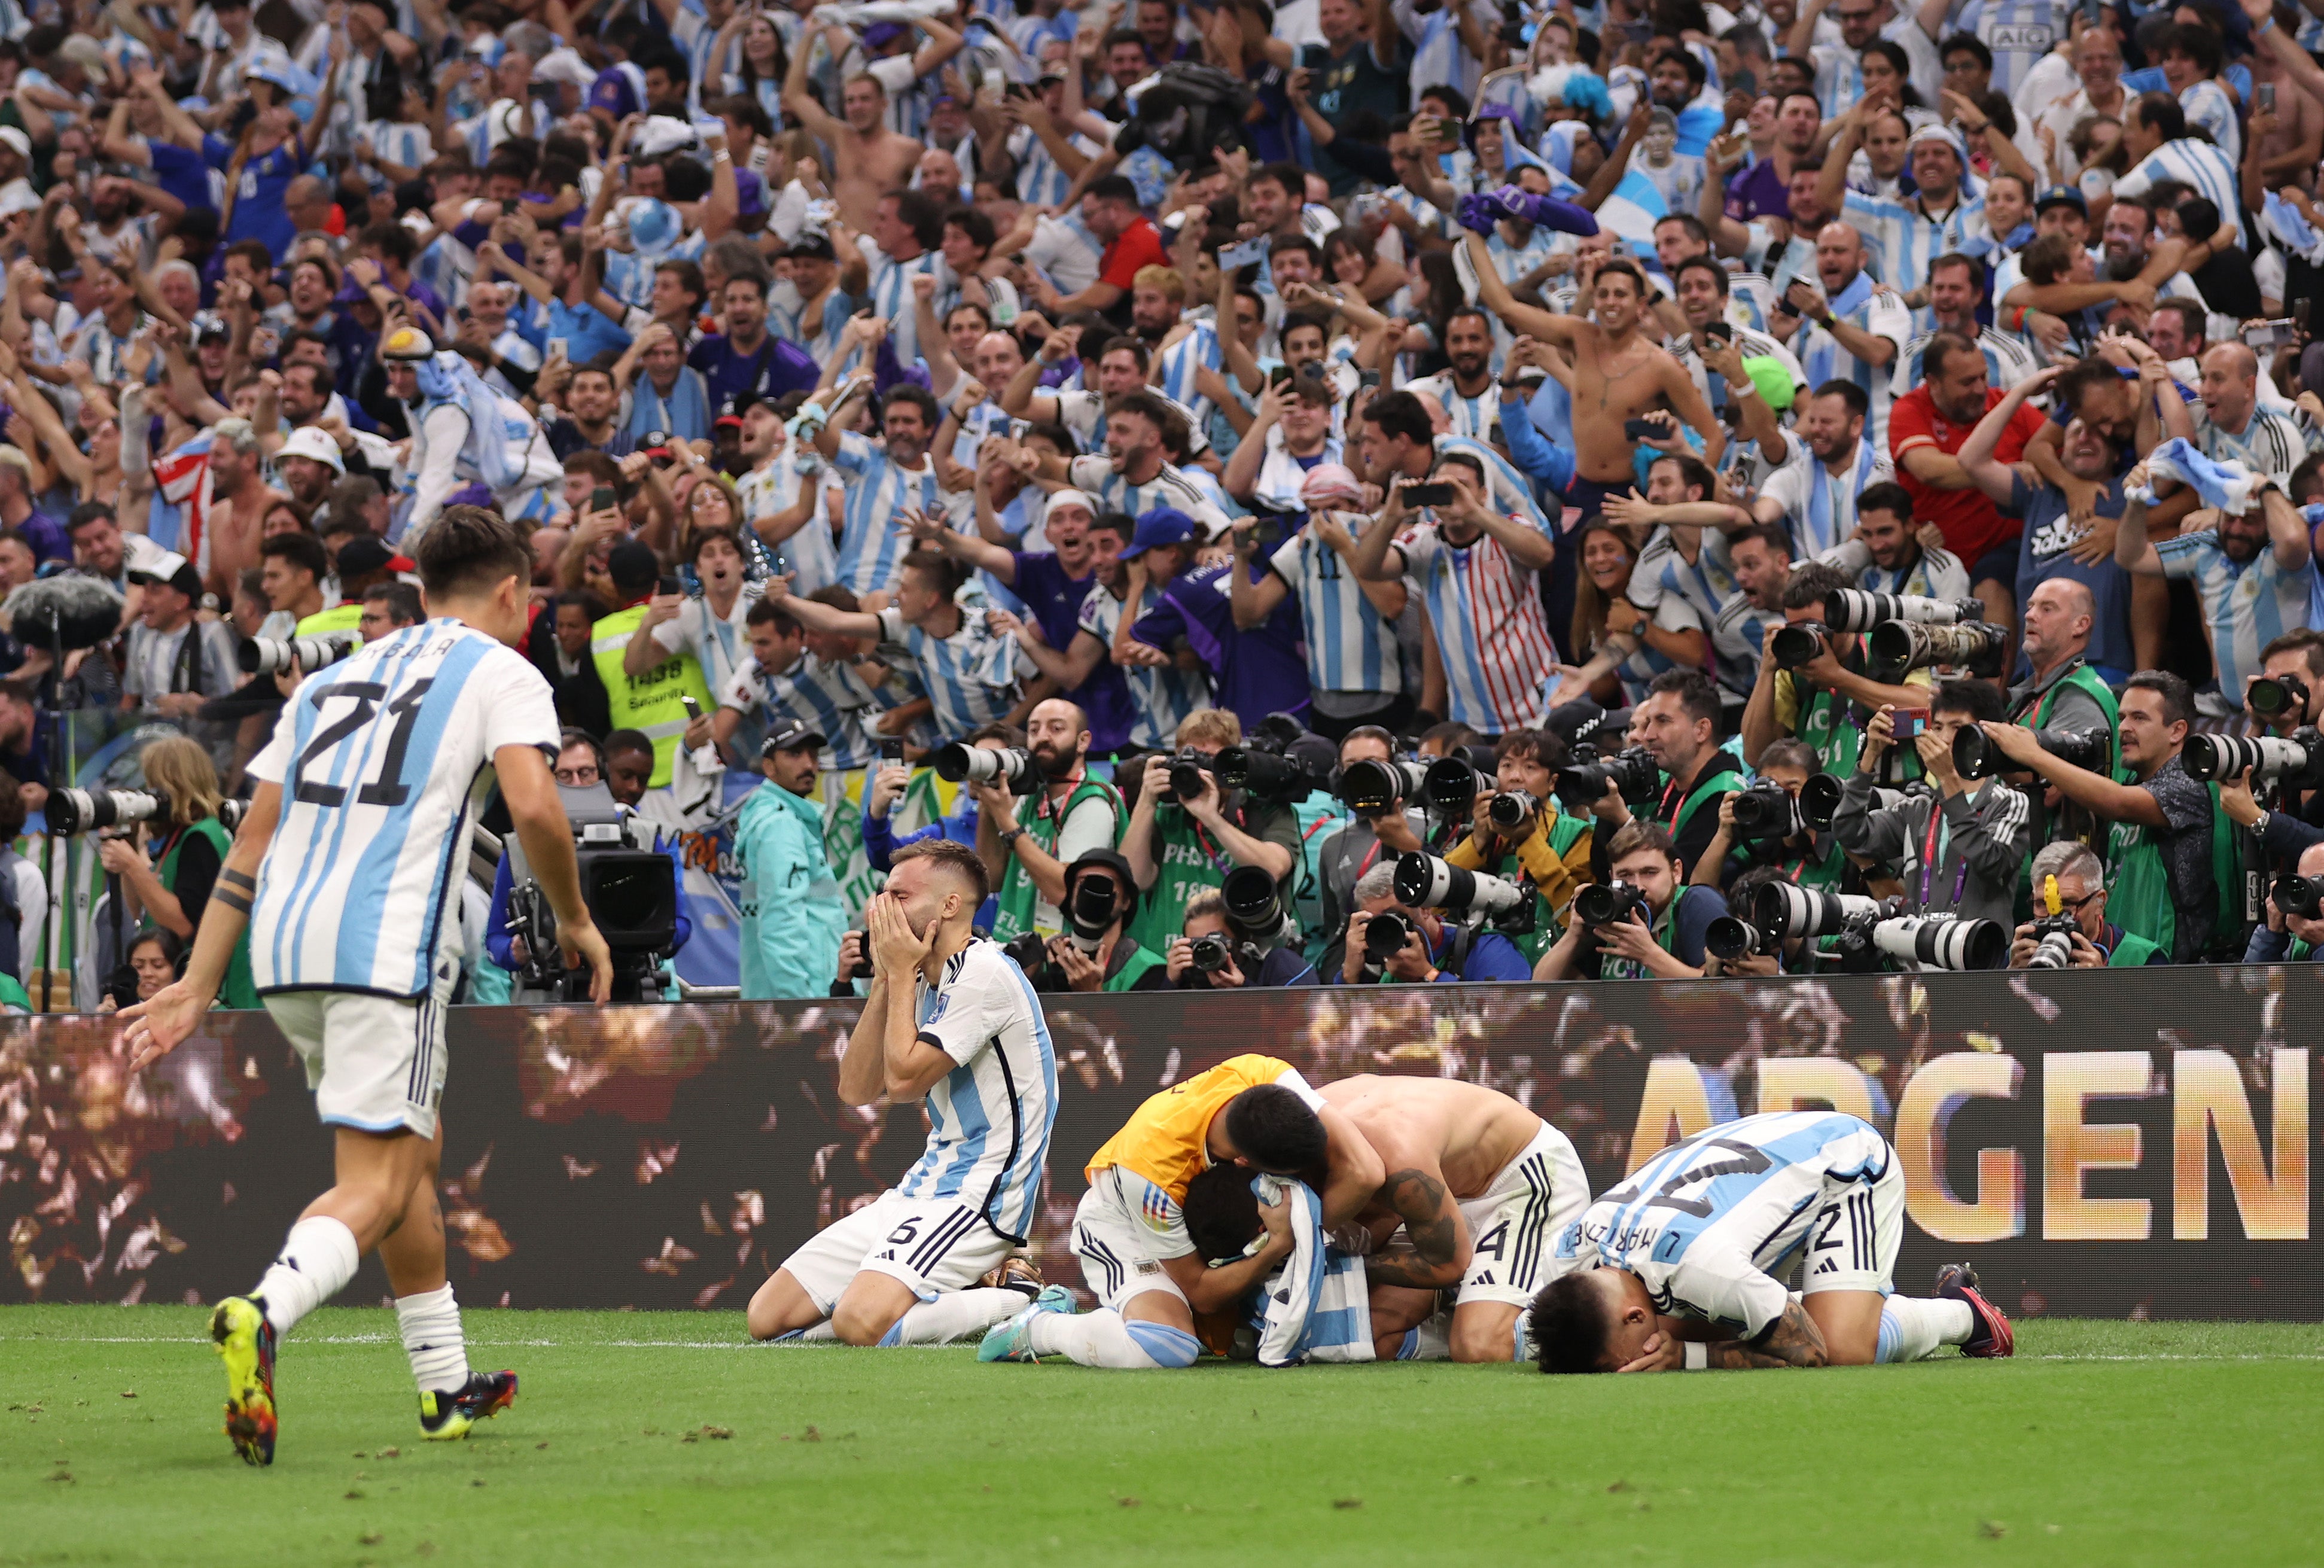 Argentina players celebrate winning the match and World Cup